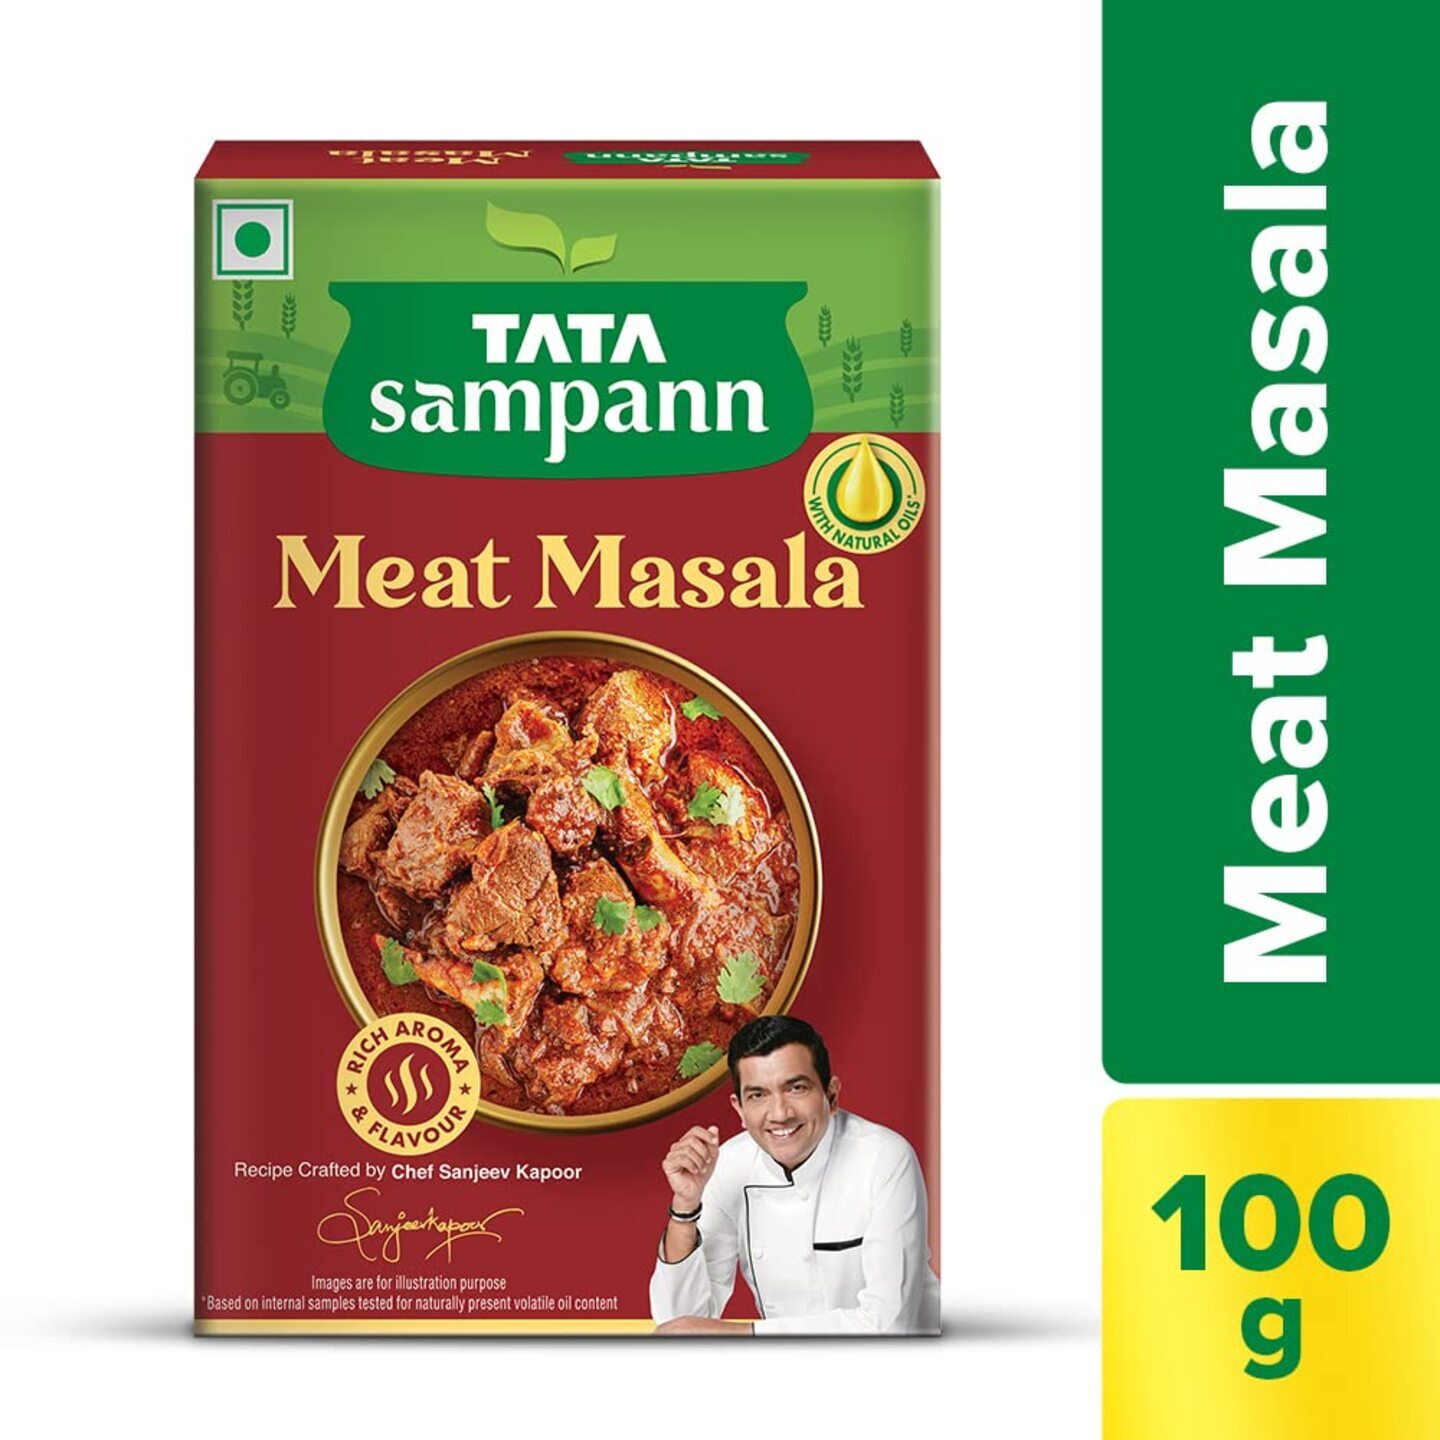 Tata Sampann Meat Masala with Natural Oils, Crafted by Chef Sanjeev Kapoor, 100g